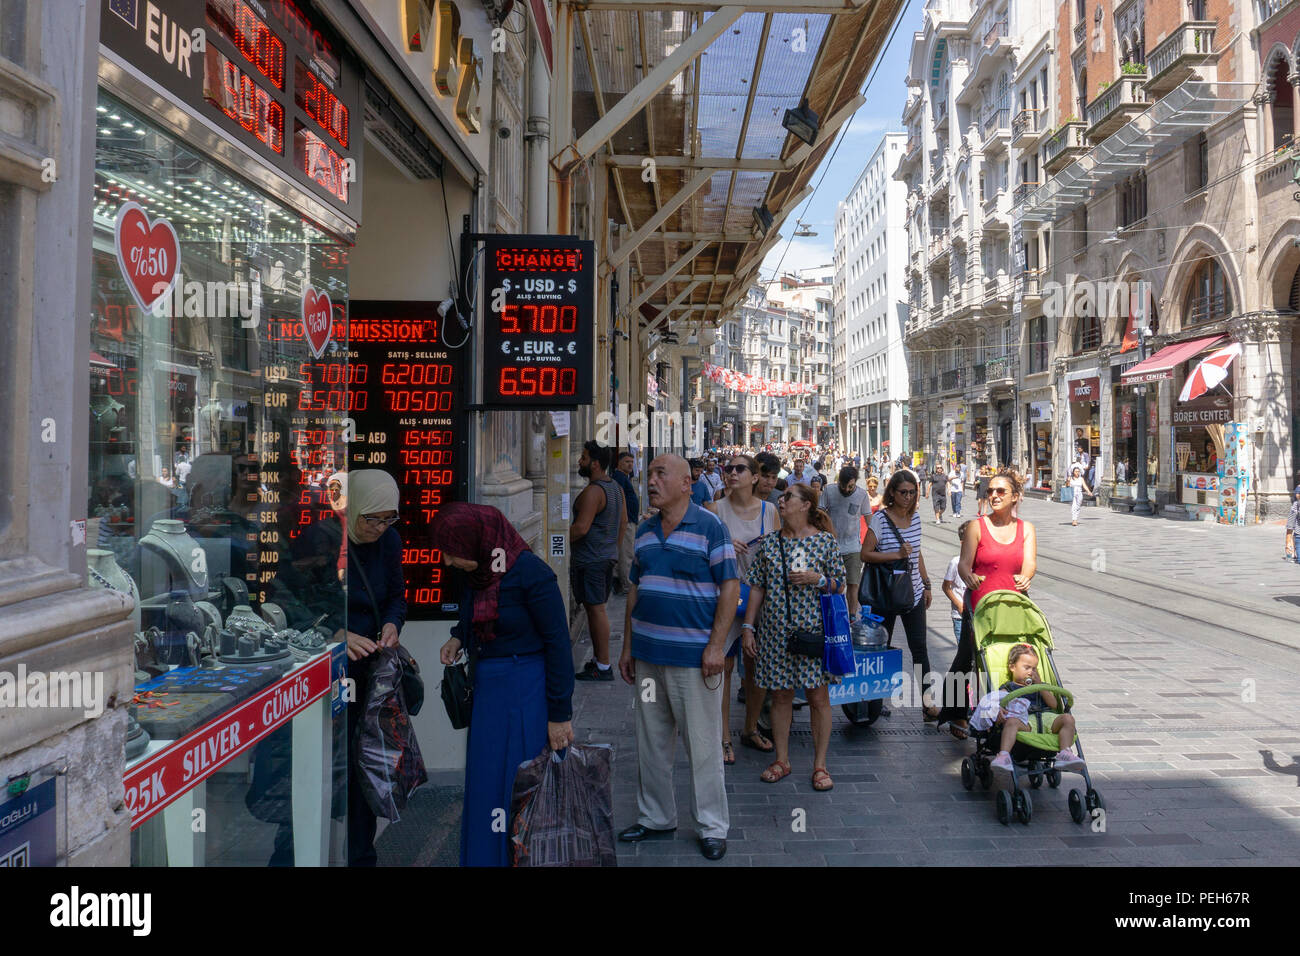 Istanbul, Turkey. 15th August 2018. People watching the change in Turkish currency Credit: Engin Karaman/Alamy Live News Stock Photo